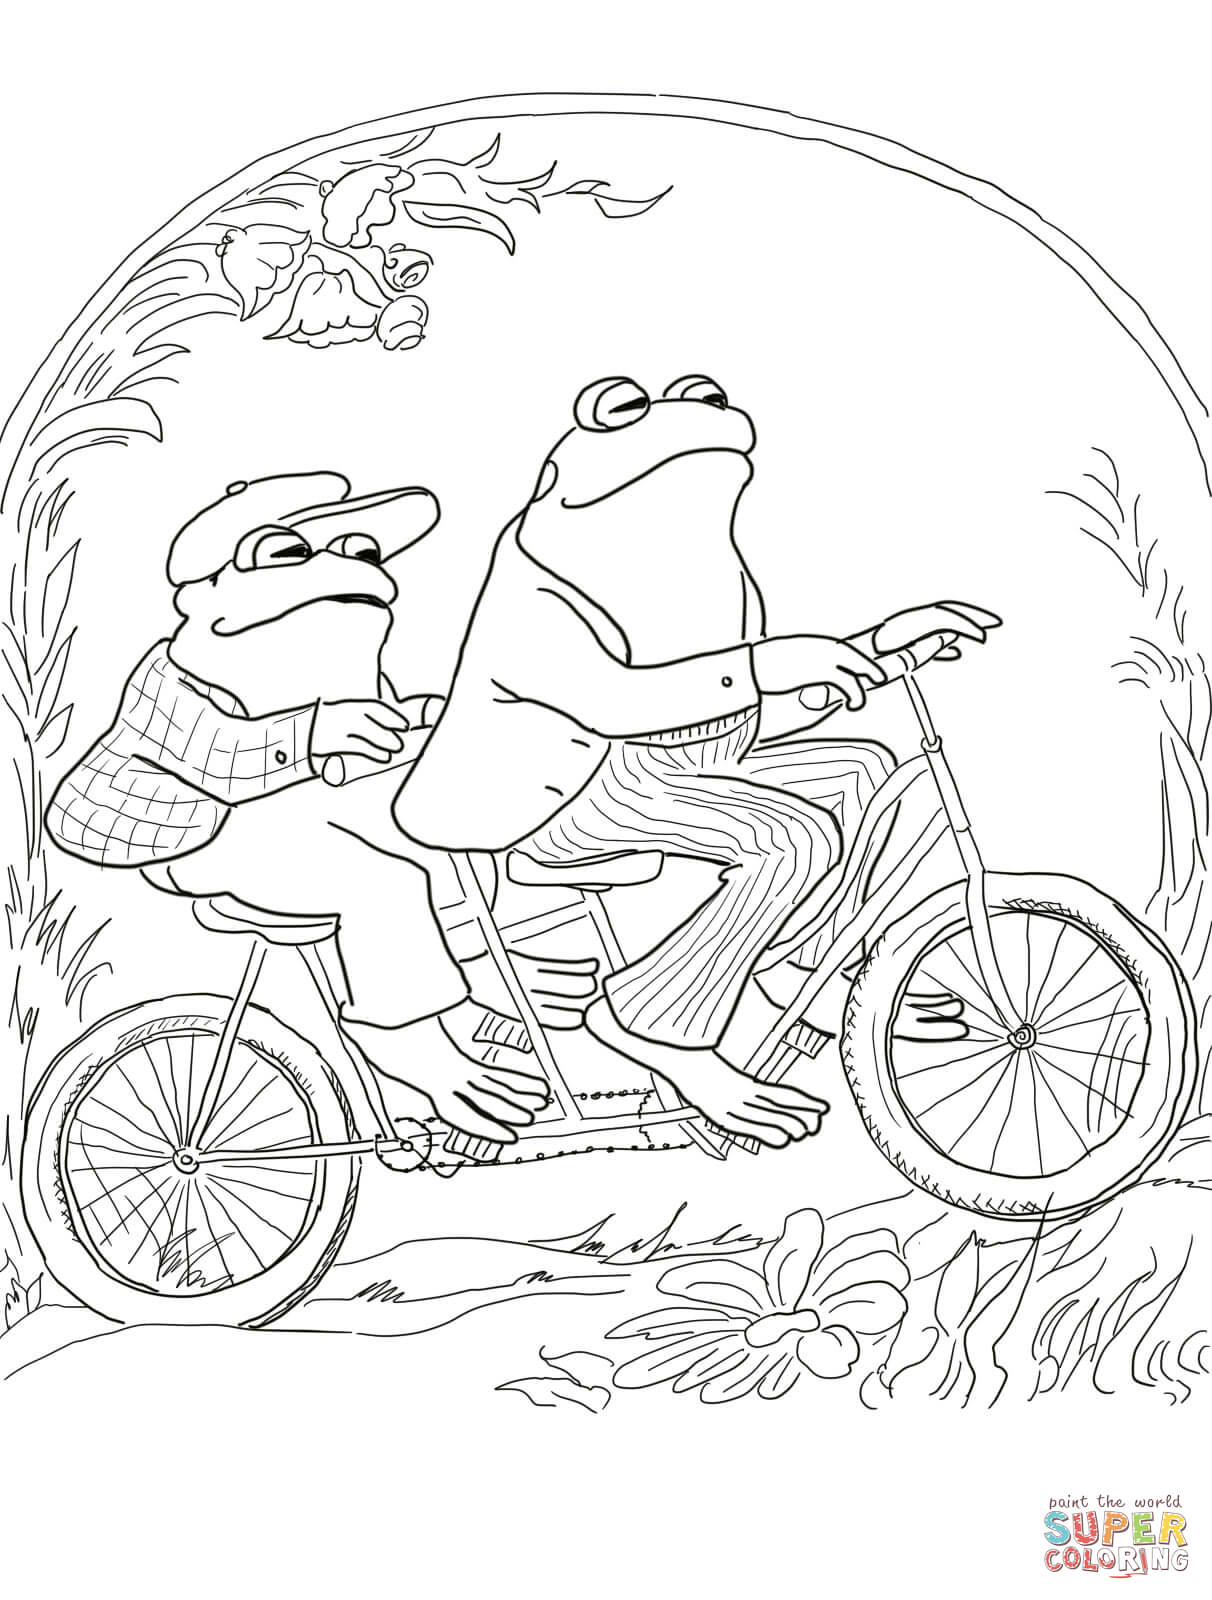 Toad Coloring Pages | Forcoloringpages.com